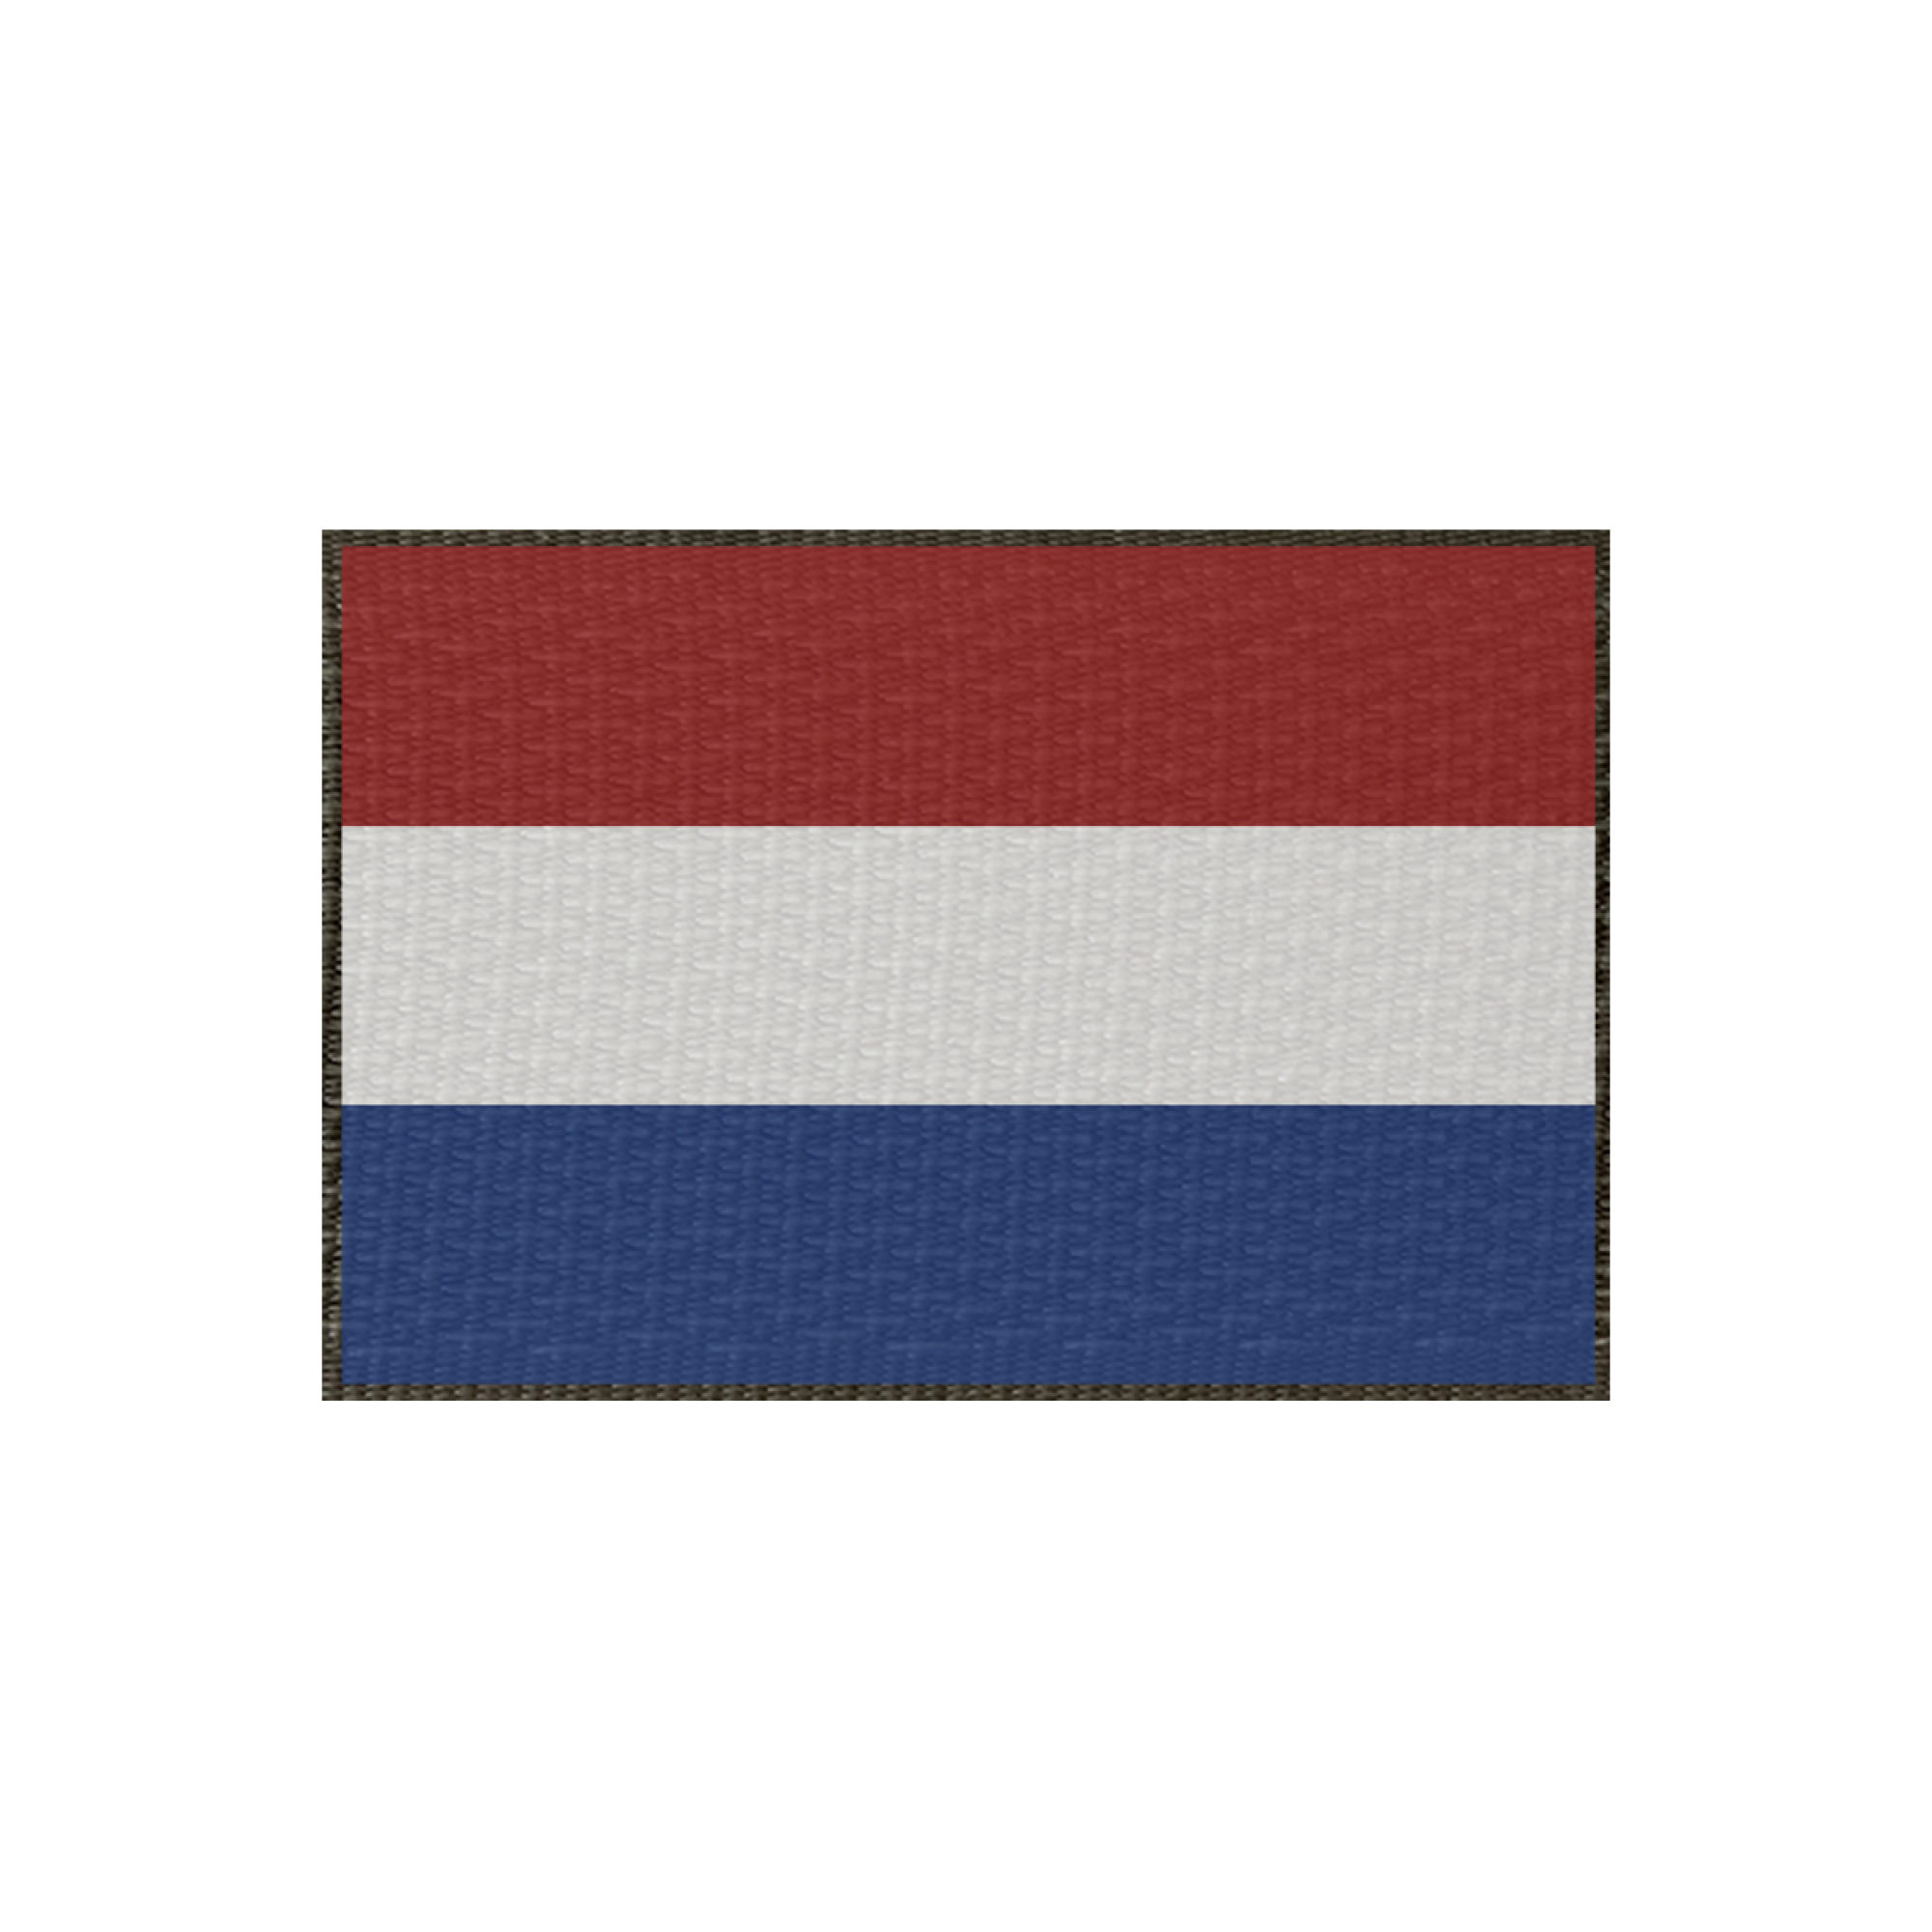 Patch Flagge Holland 75x50mm, Klett